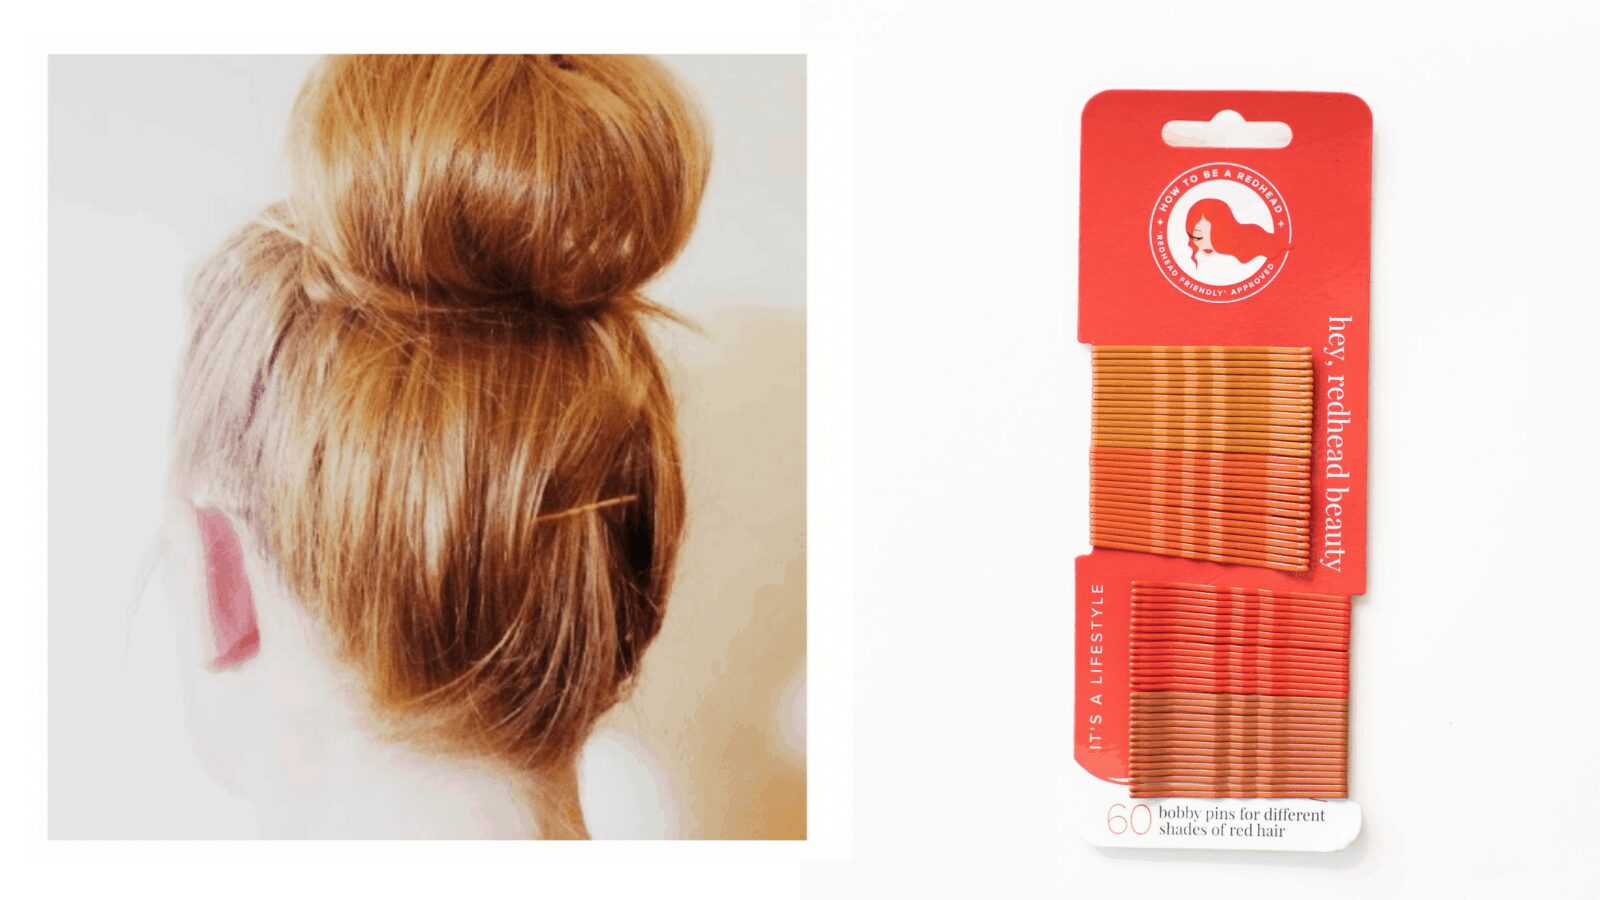 3 Bobby Pin Tricks Every Redhead Should Know